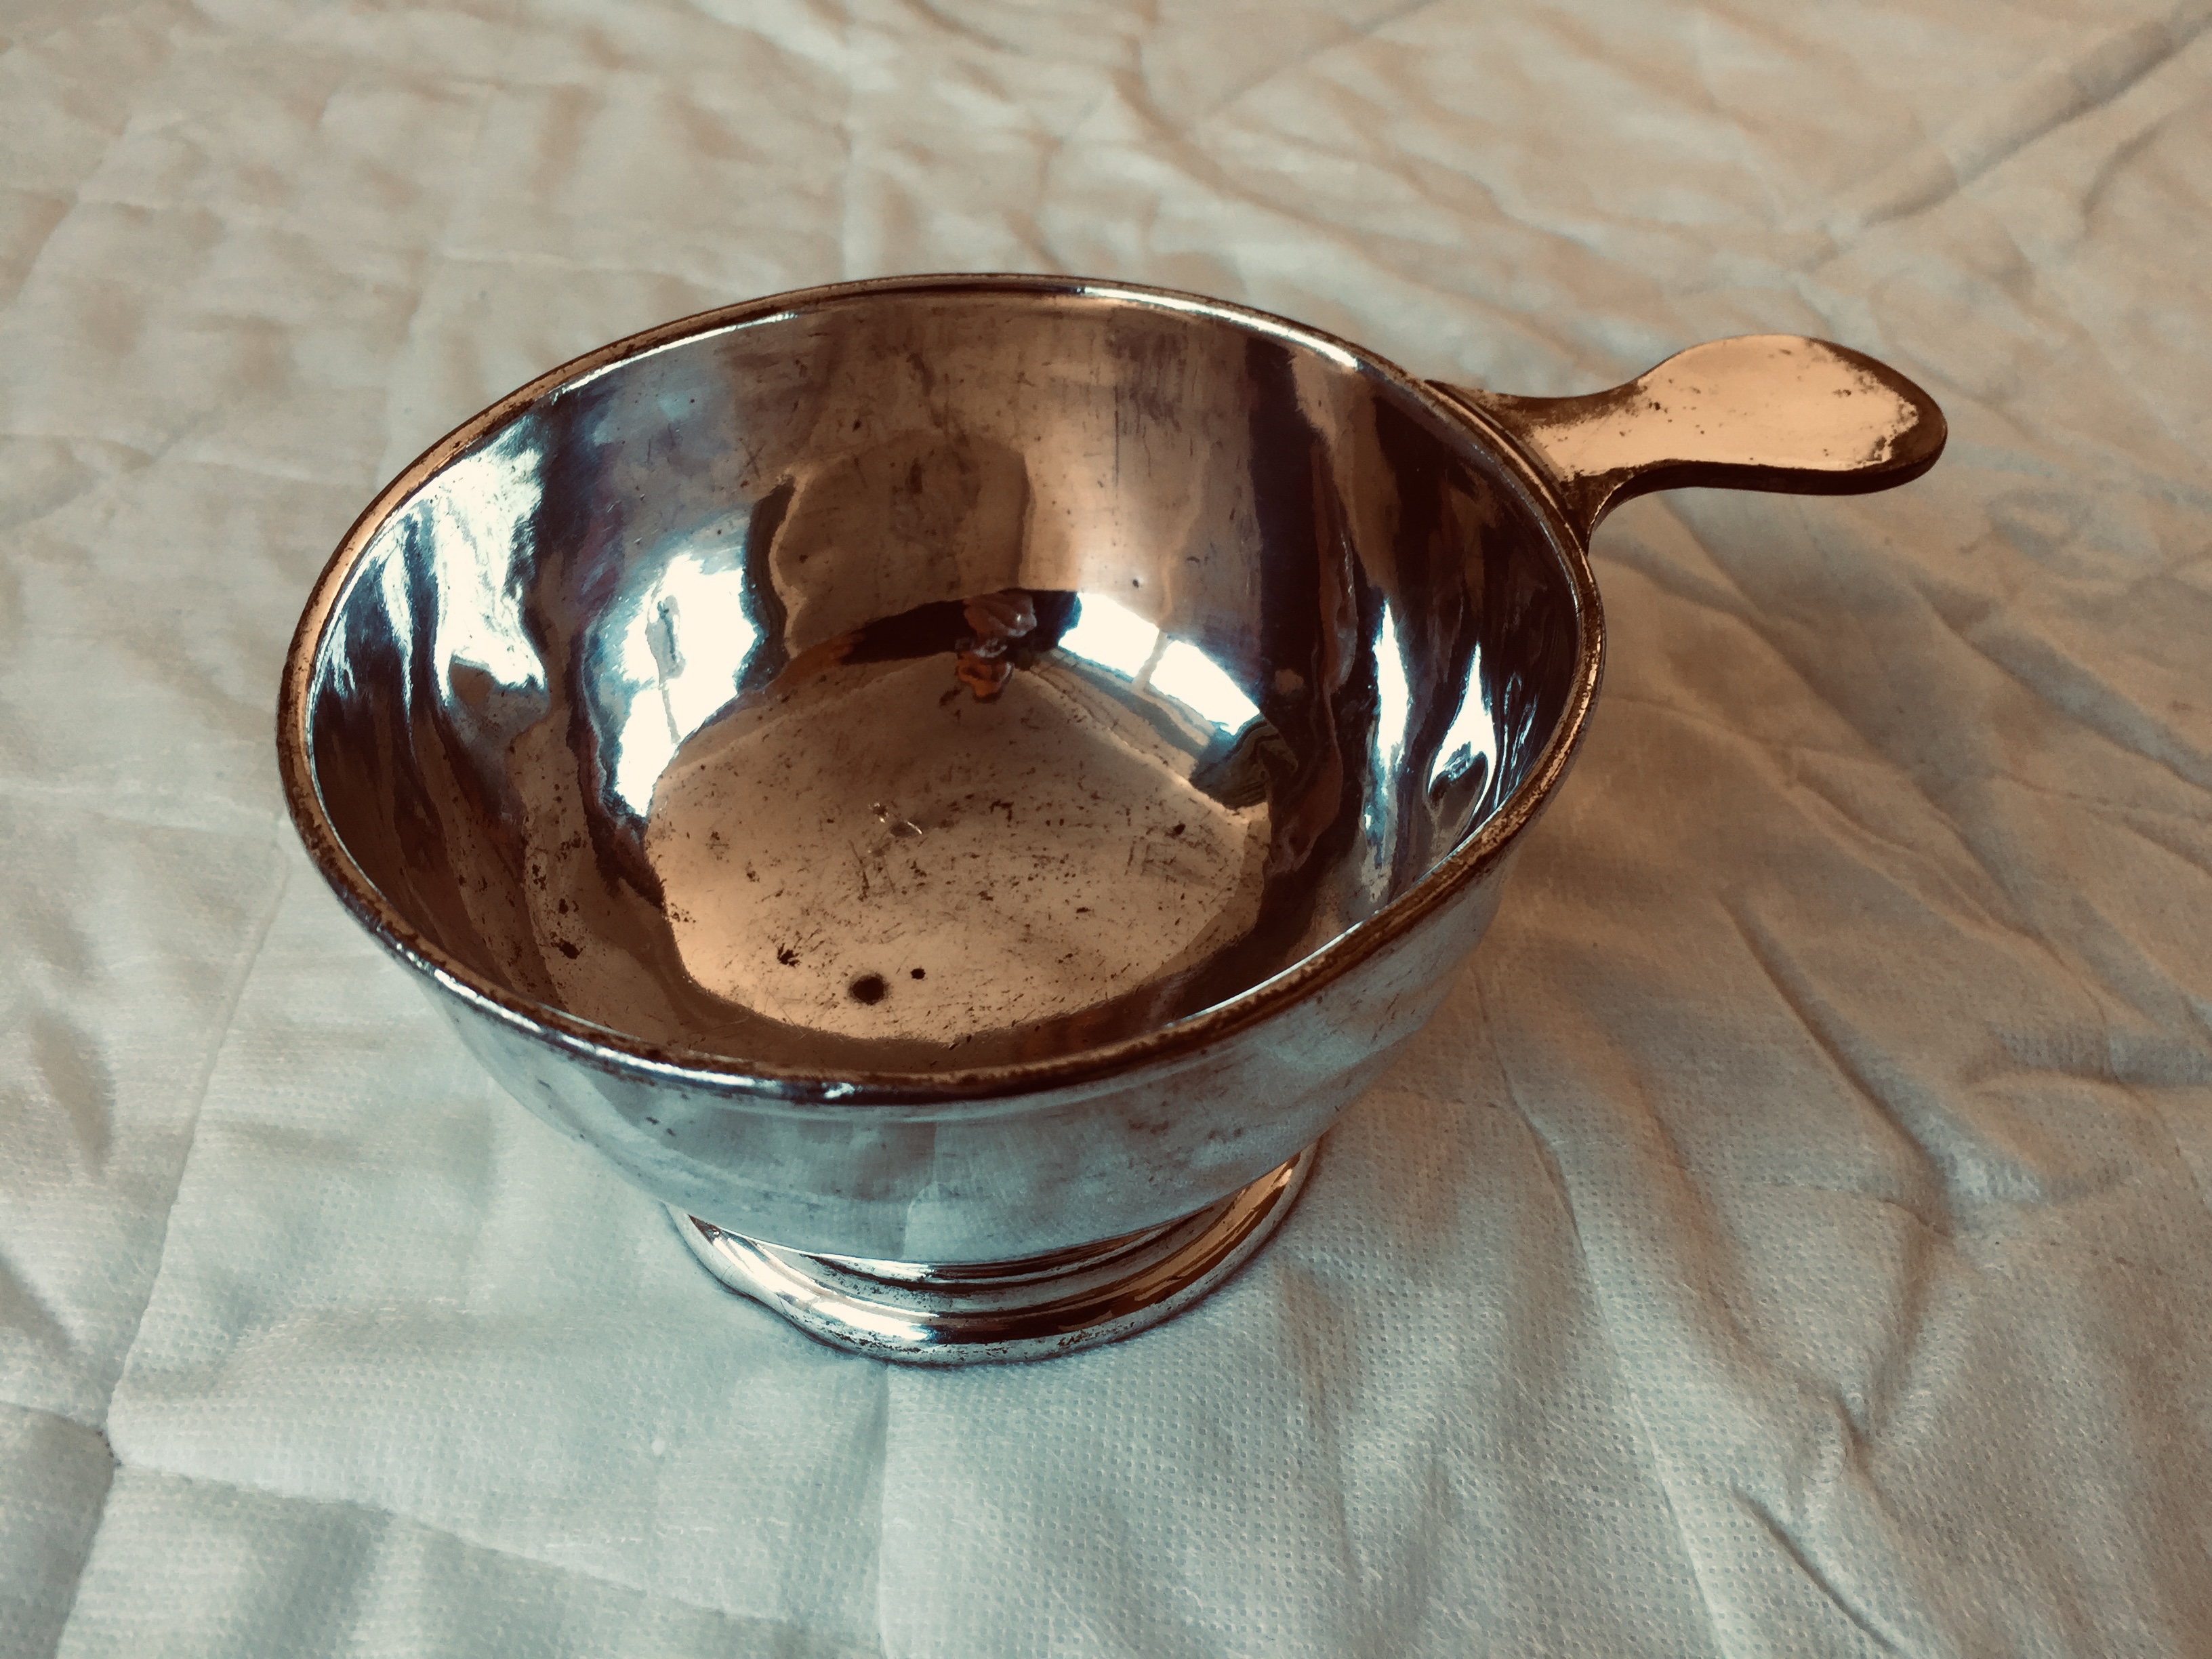 SOUP SERVING DISH FROM THE SHAW SAVILLE LINE